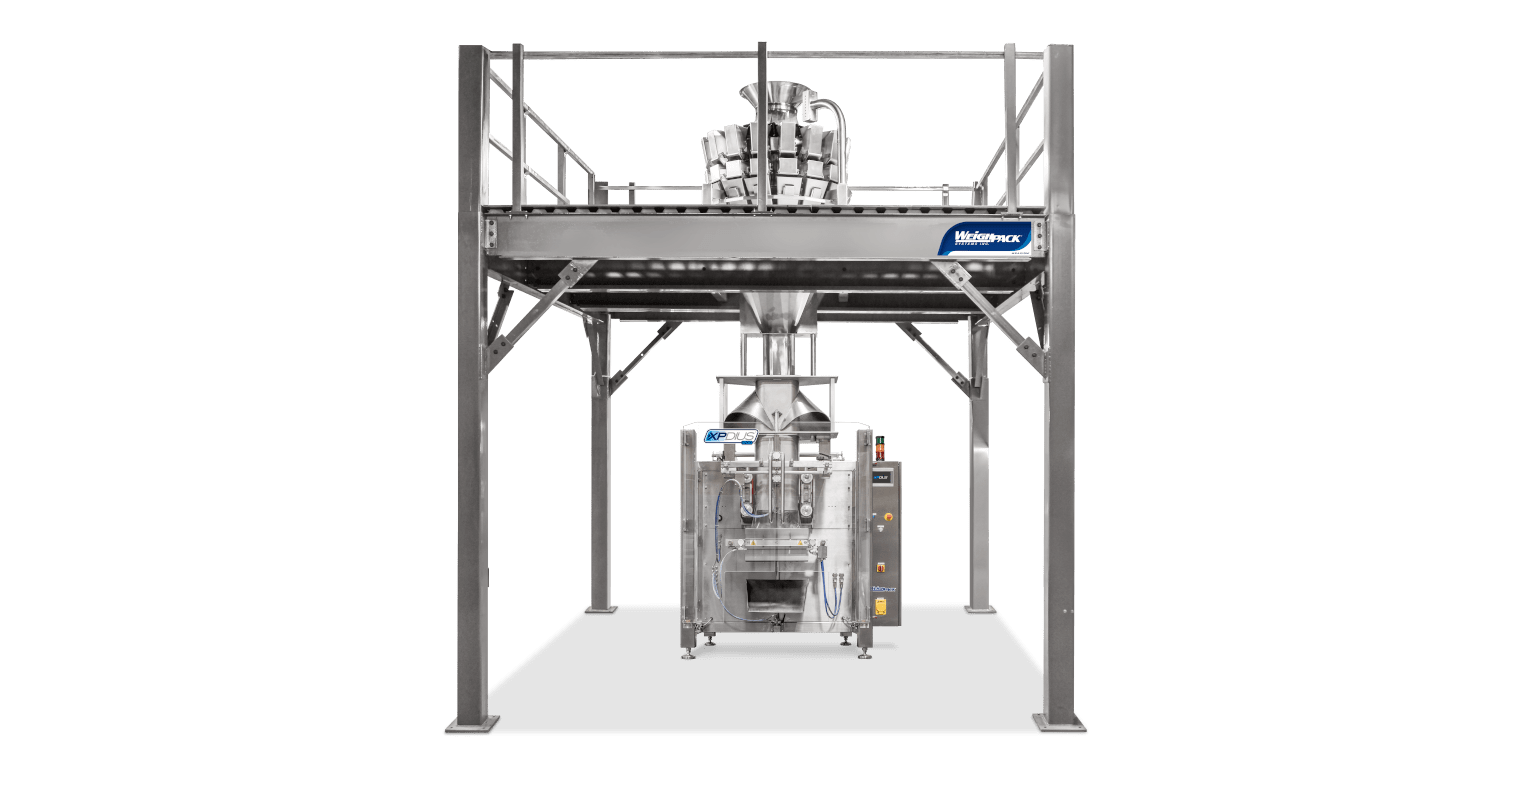 Vertical form filling and sealing machine